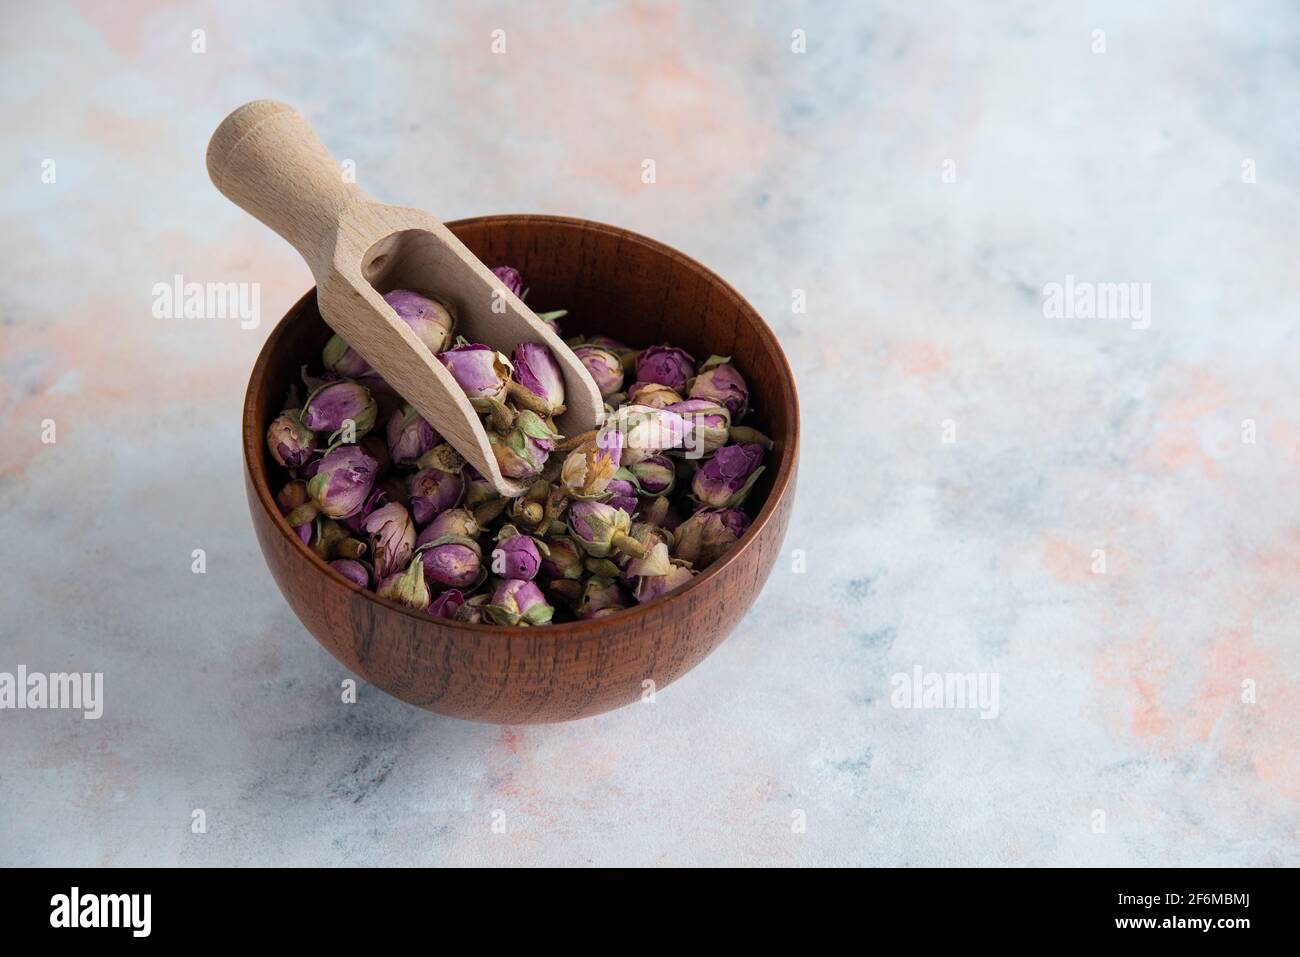 Dry flowers in wooden bowl over white background Stock Photo